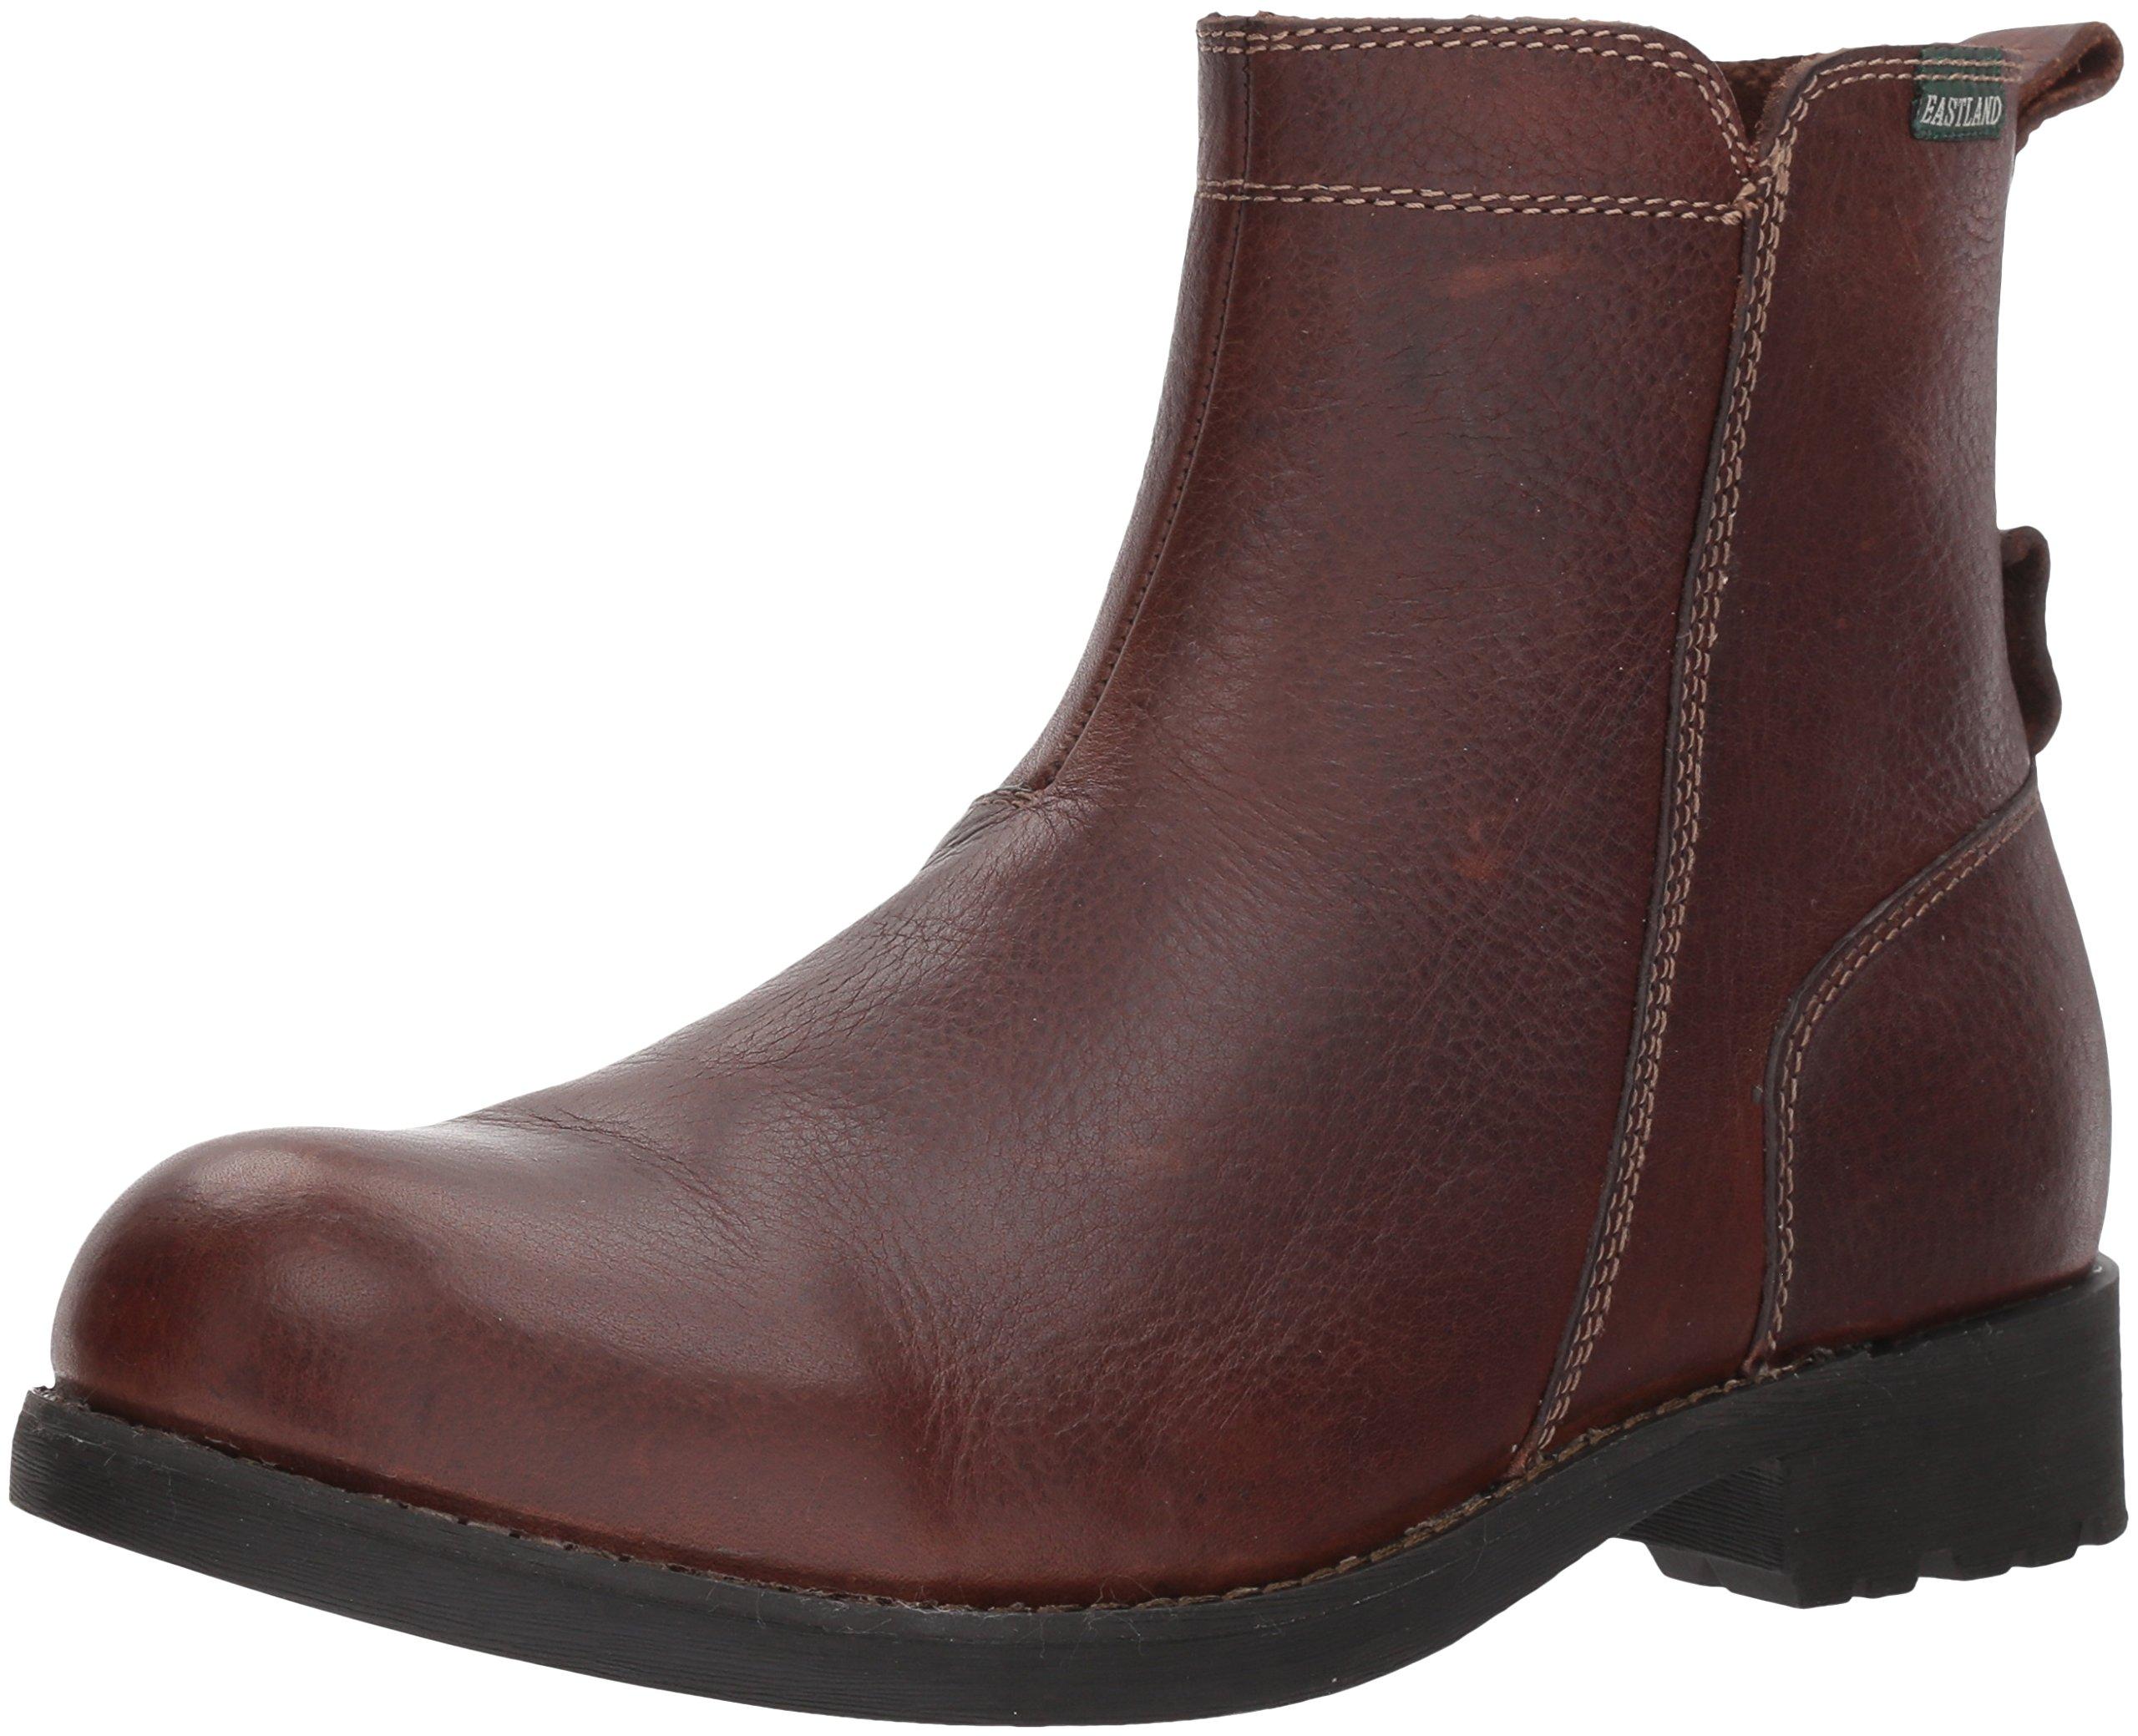 Eastland Leather Jett Ankle Boot in Brown for Men - Lyst